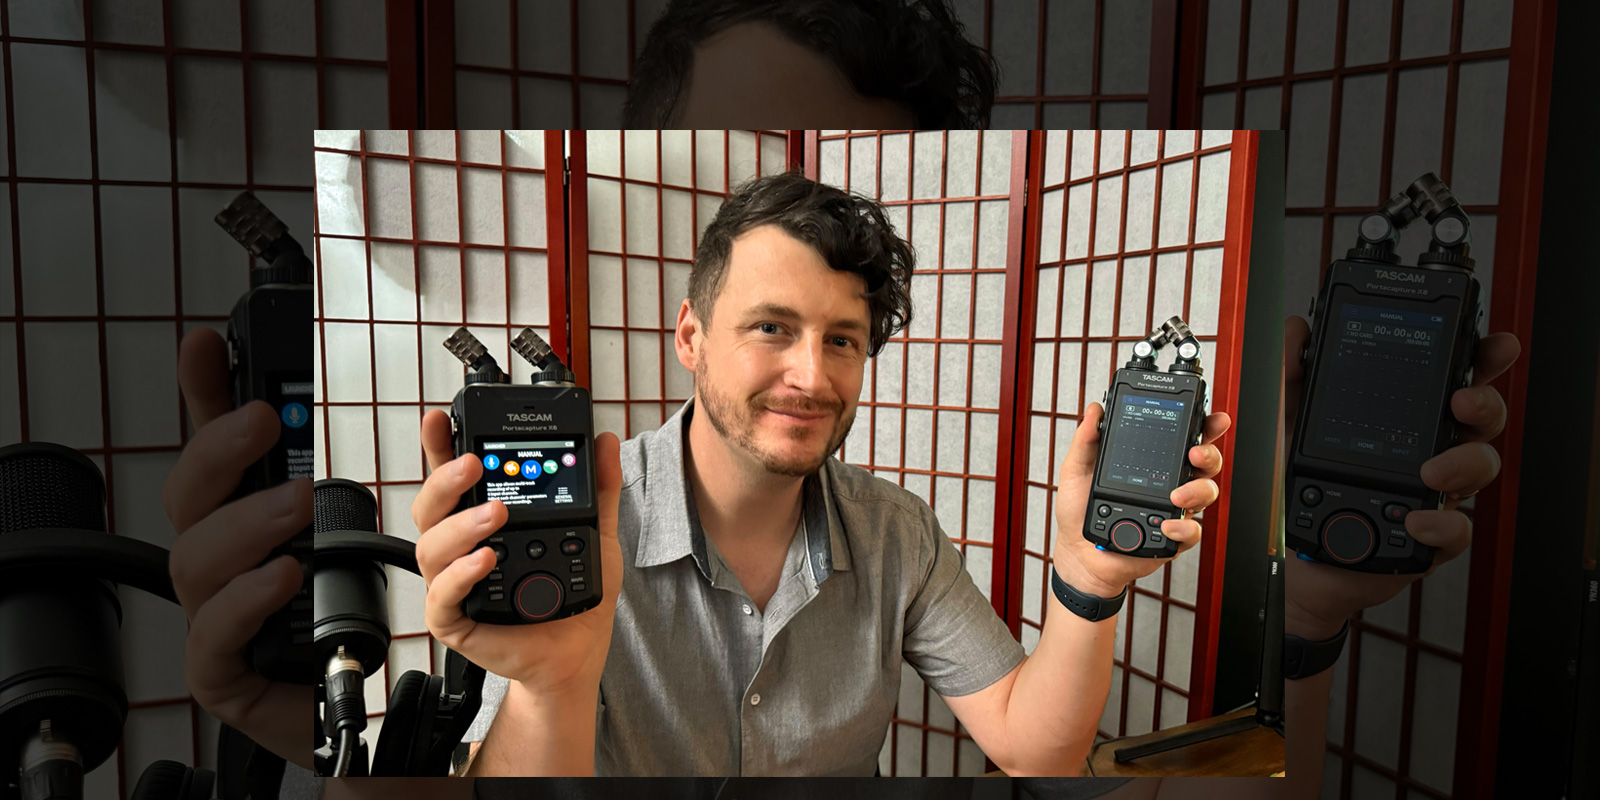 TASCAM Portacapture X8 and X6 Portable Audio Field Recorders Help Michael Fitzgerald Capture Sound Effortlessly